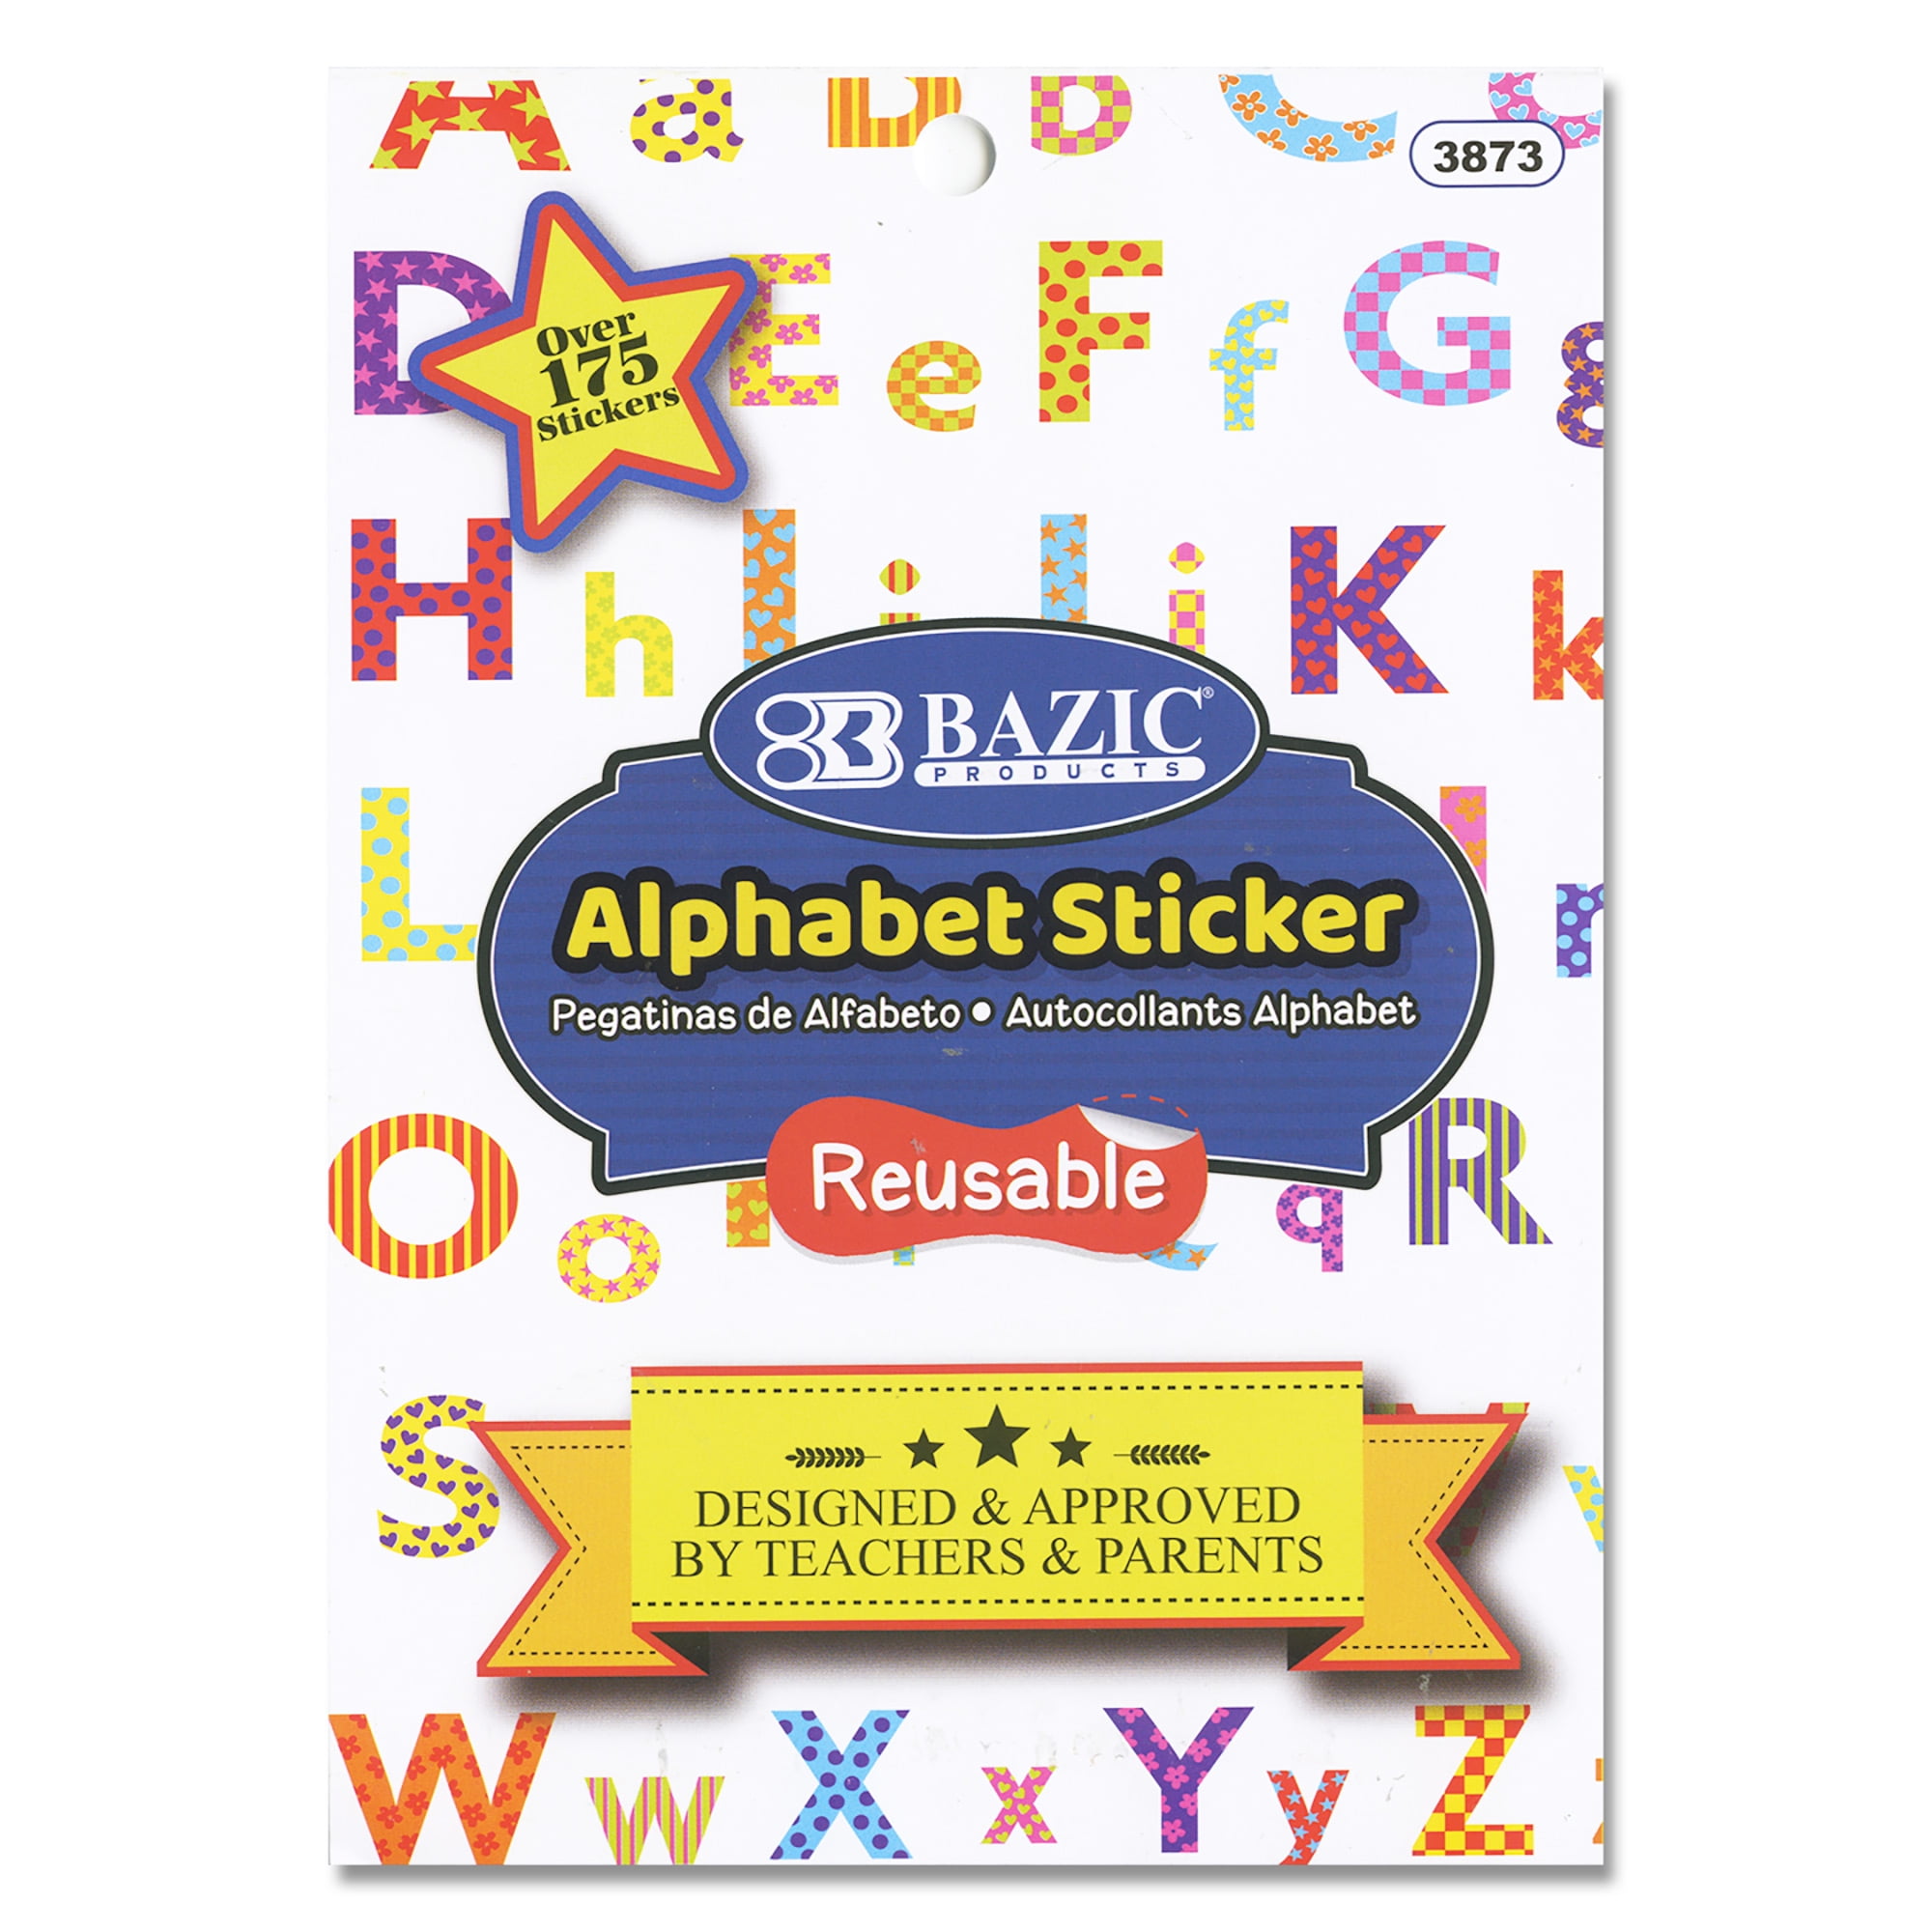 SEWACC 9 Sheets Table Number Stickers Self Adhesive Vinyl Alphabet Stickers  Small Number Stickers ABC Sticker Classroom Stickers Sparkle Stickers